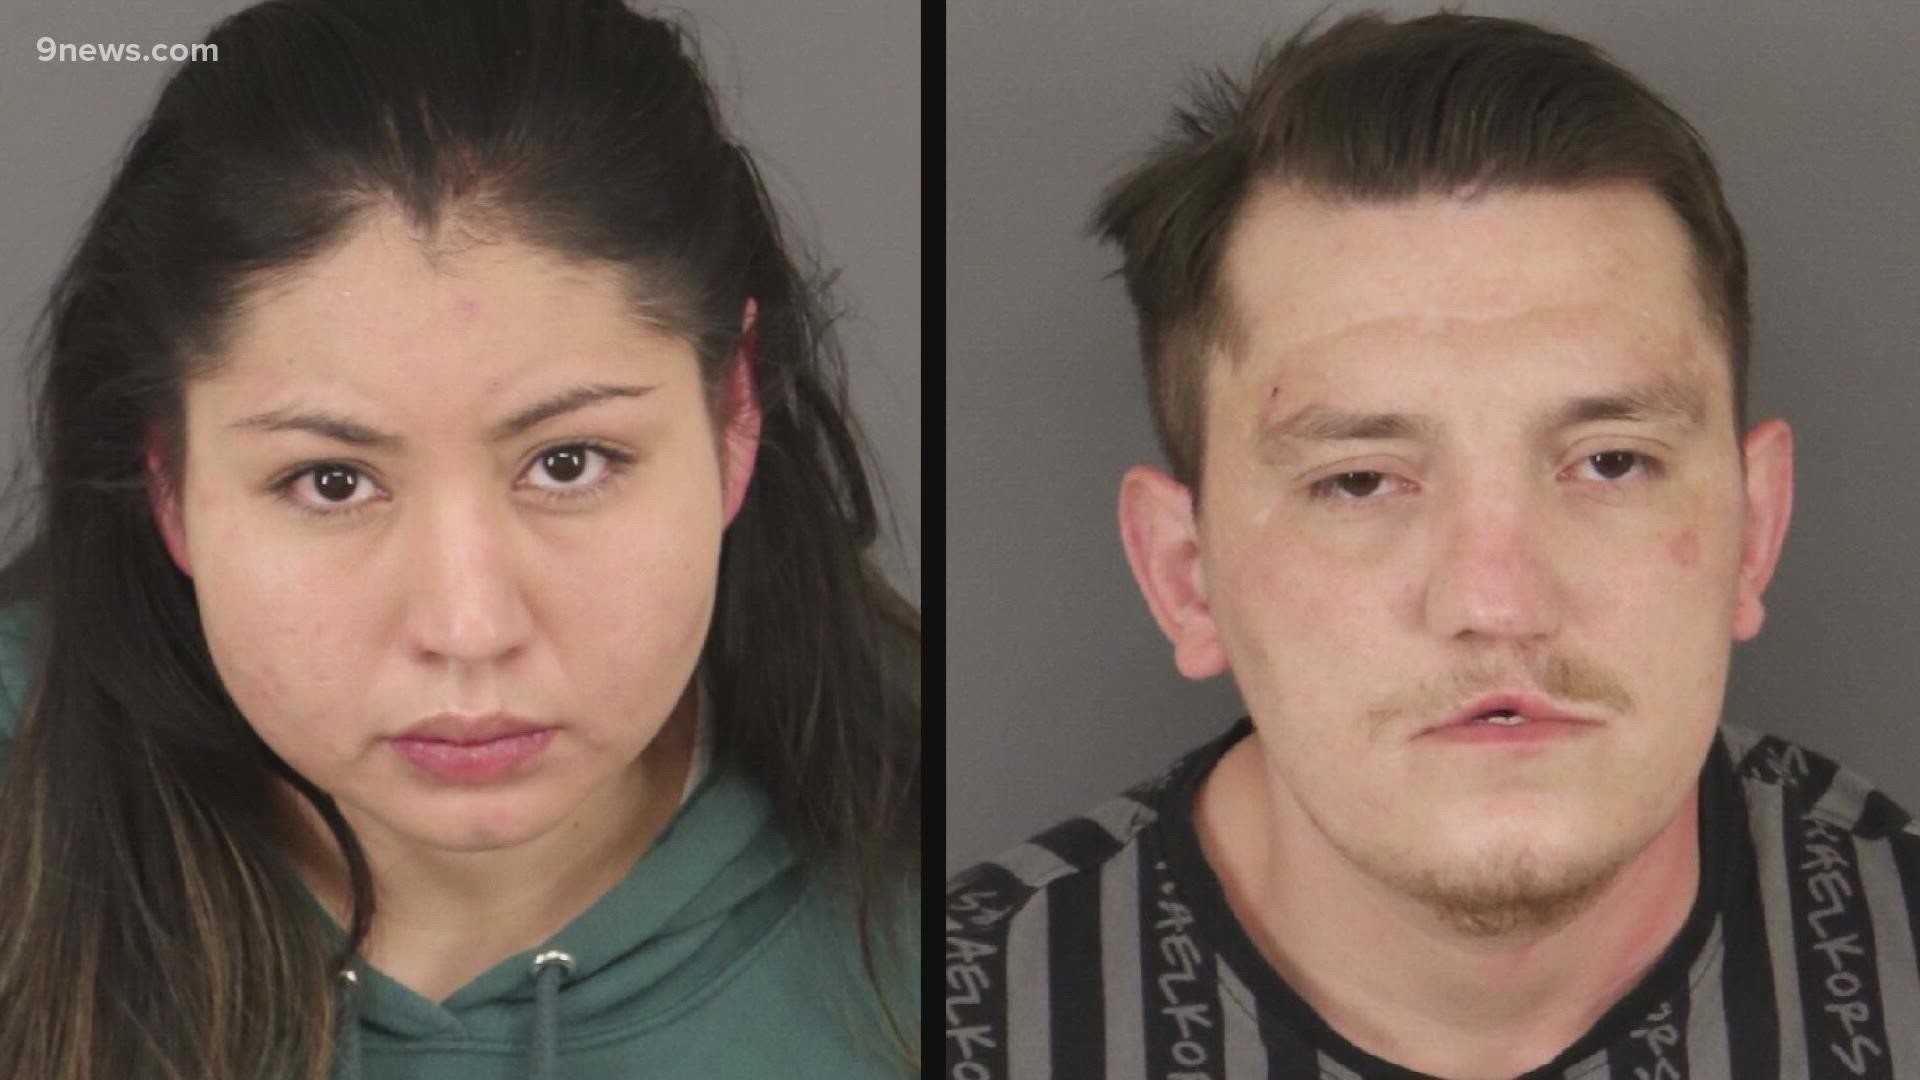 The parents are charged with child abuse resulting in death and distribution of fentanyl following the 23-year-old's death, Brighton Police Department said.